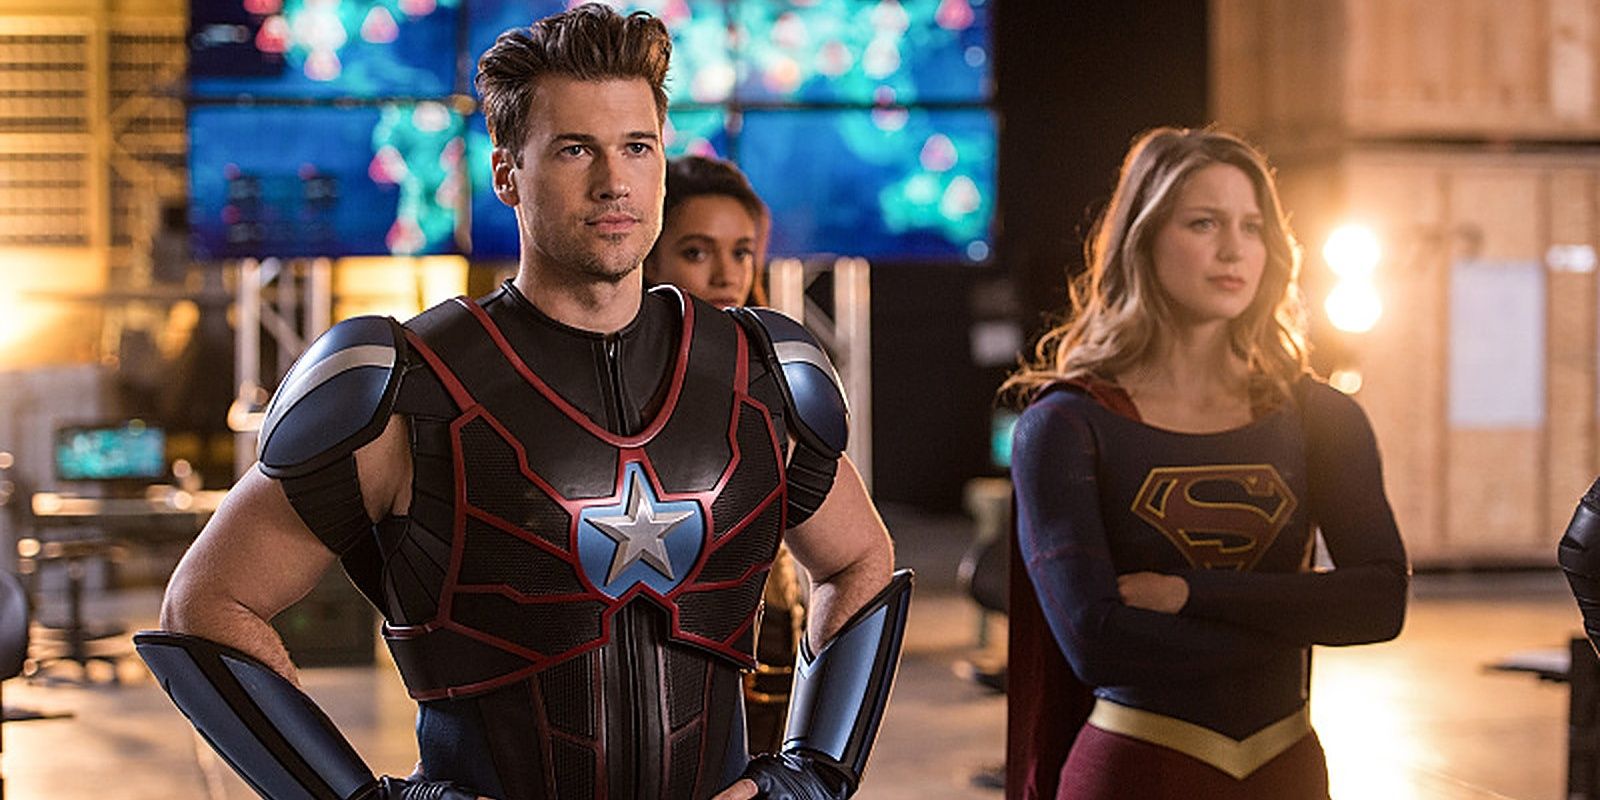 Nate Heywood is suited up alongside Supergirl in Legends of Tomorrow